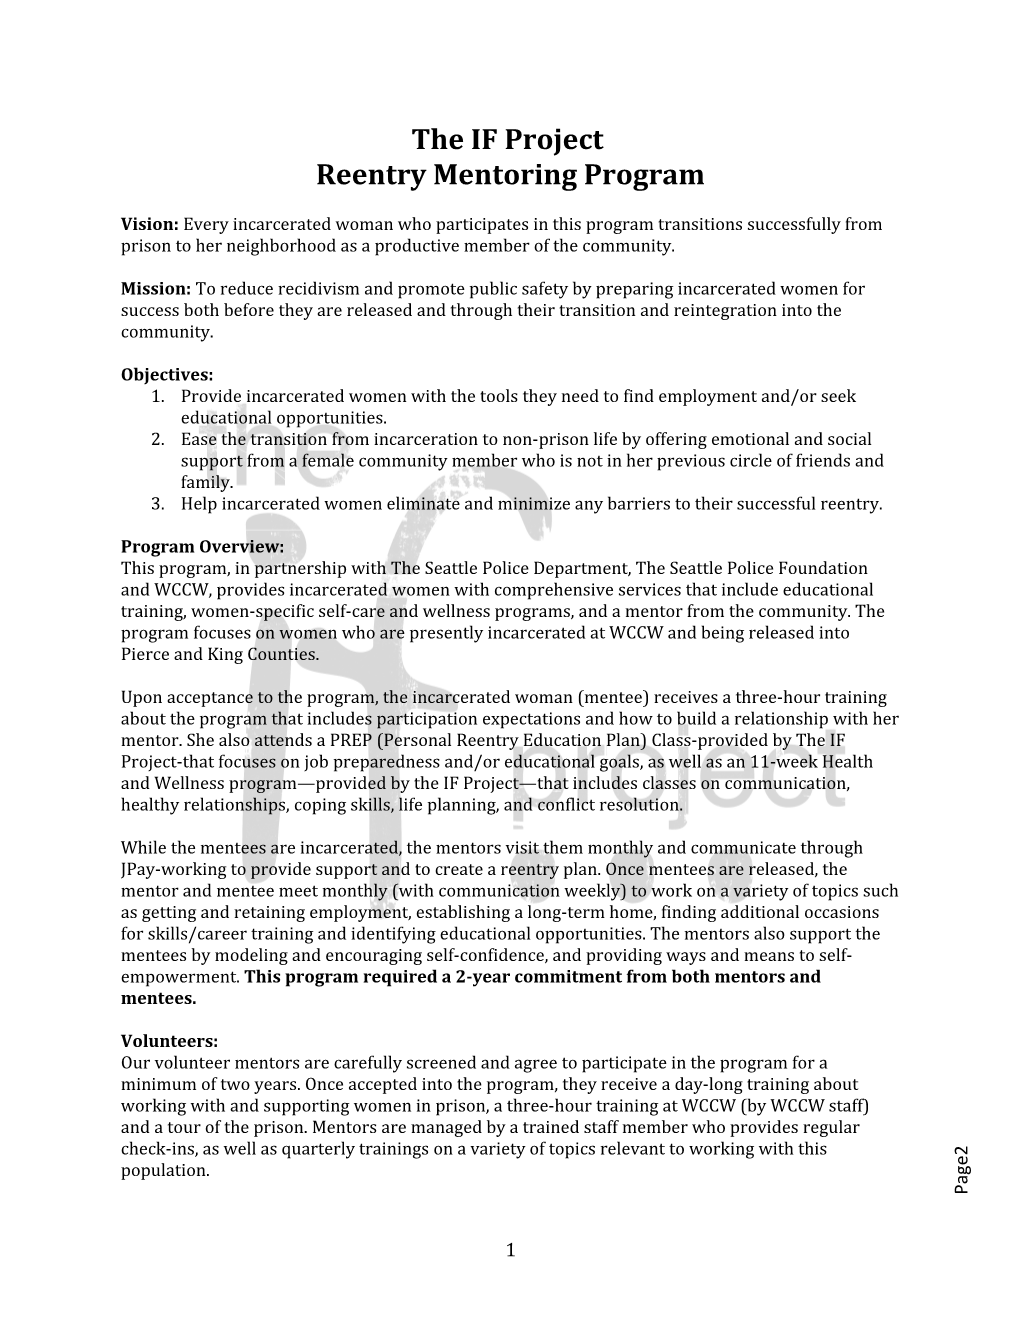 The IF Project Reentry Mentoring Program